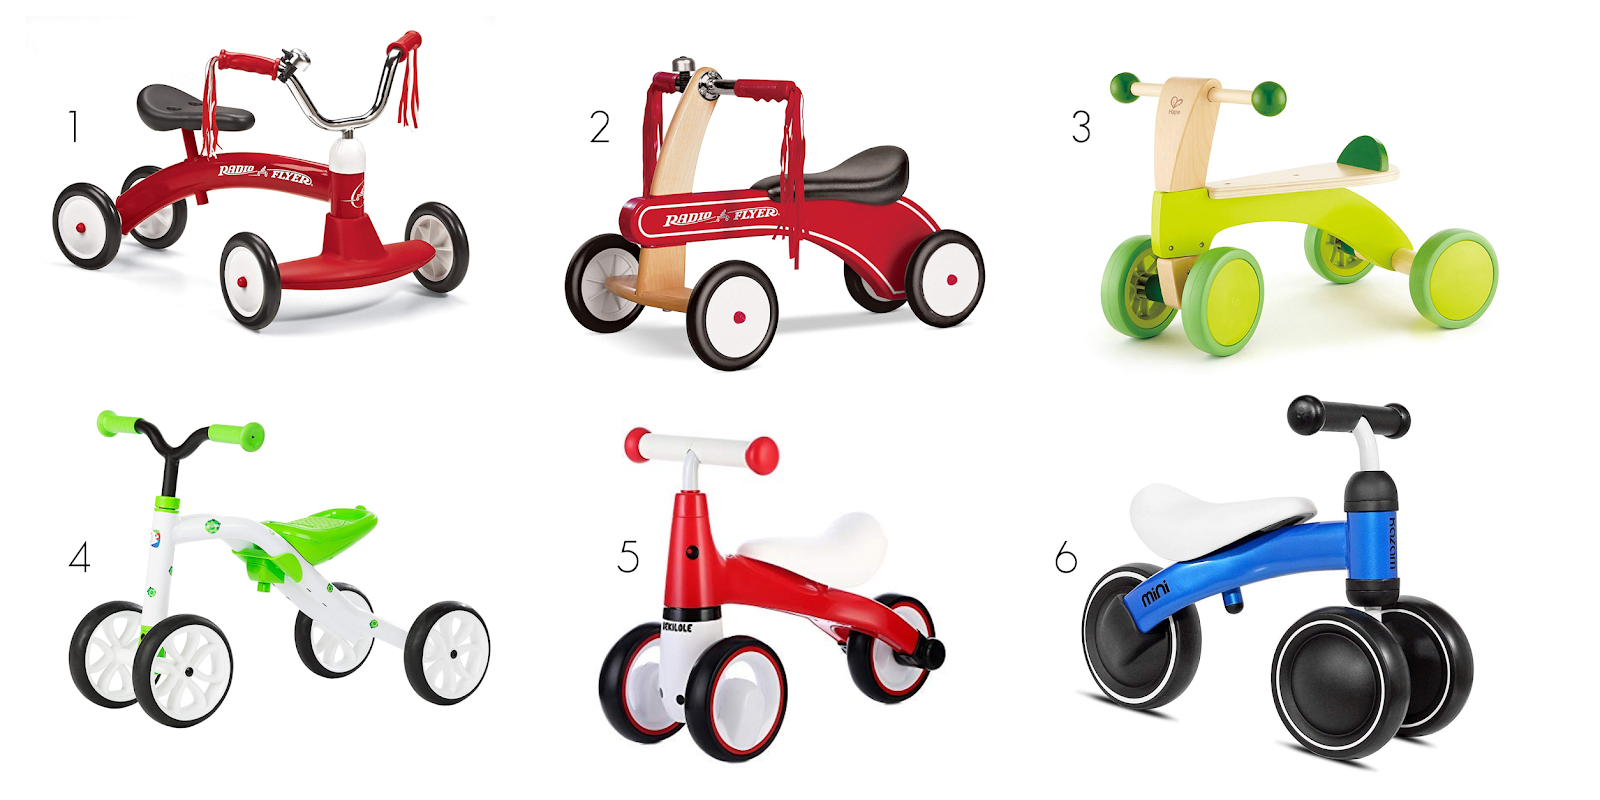 Montessori friendly scooter and ride on options for toddlers